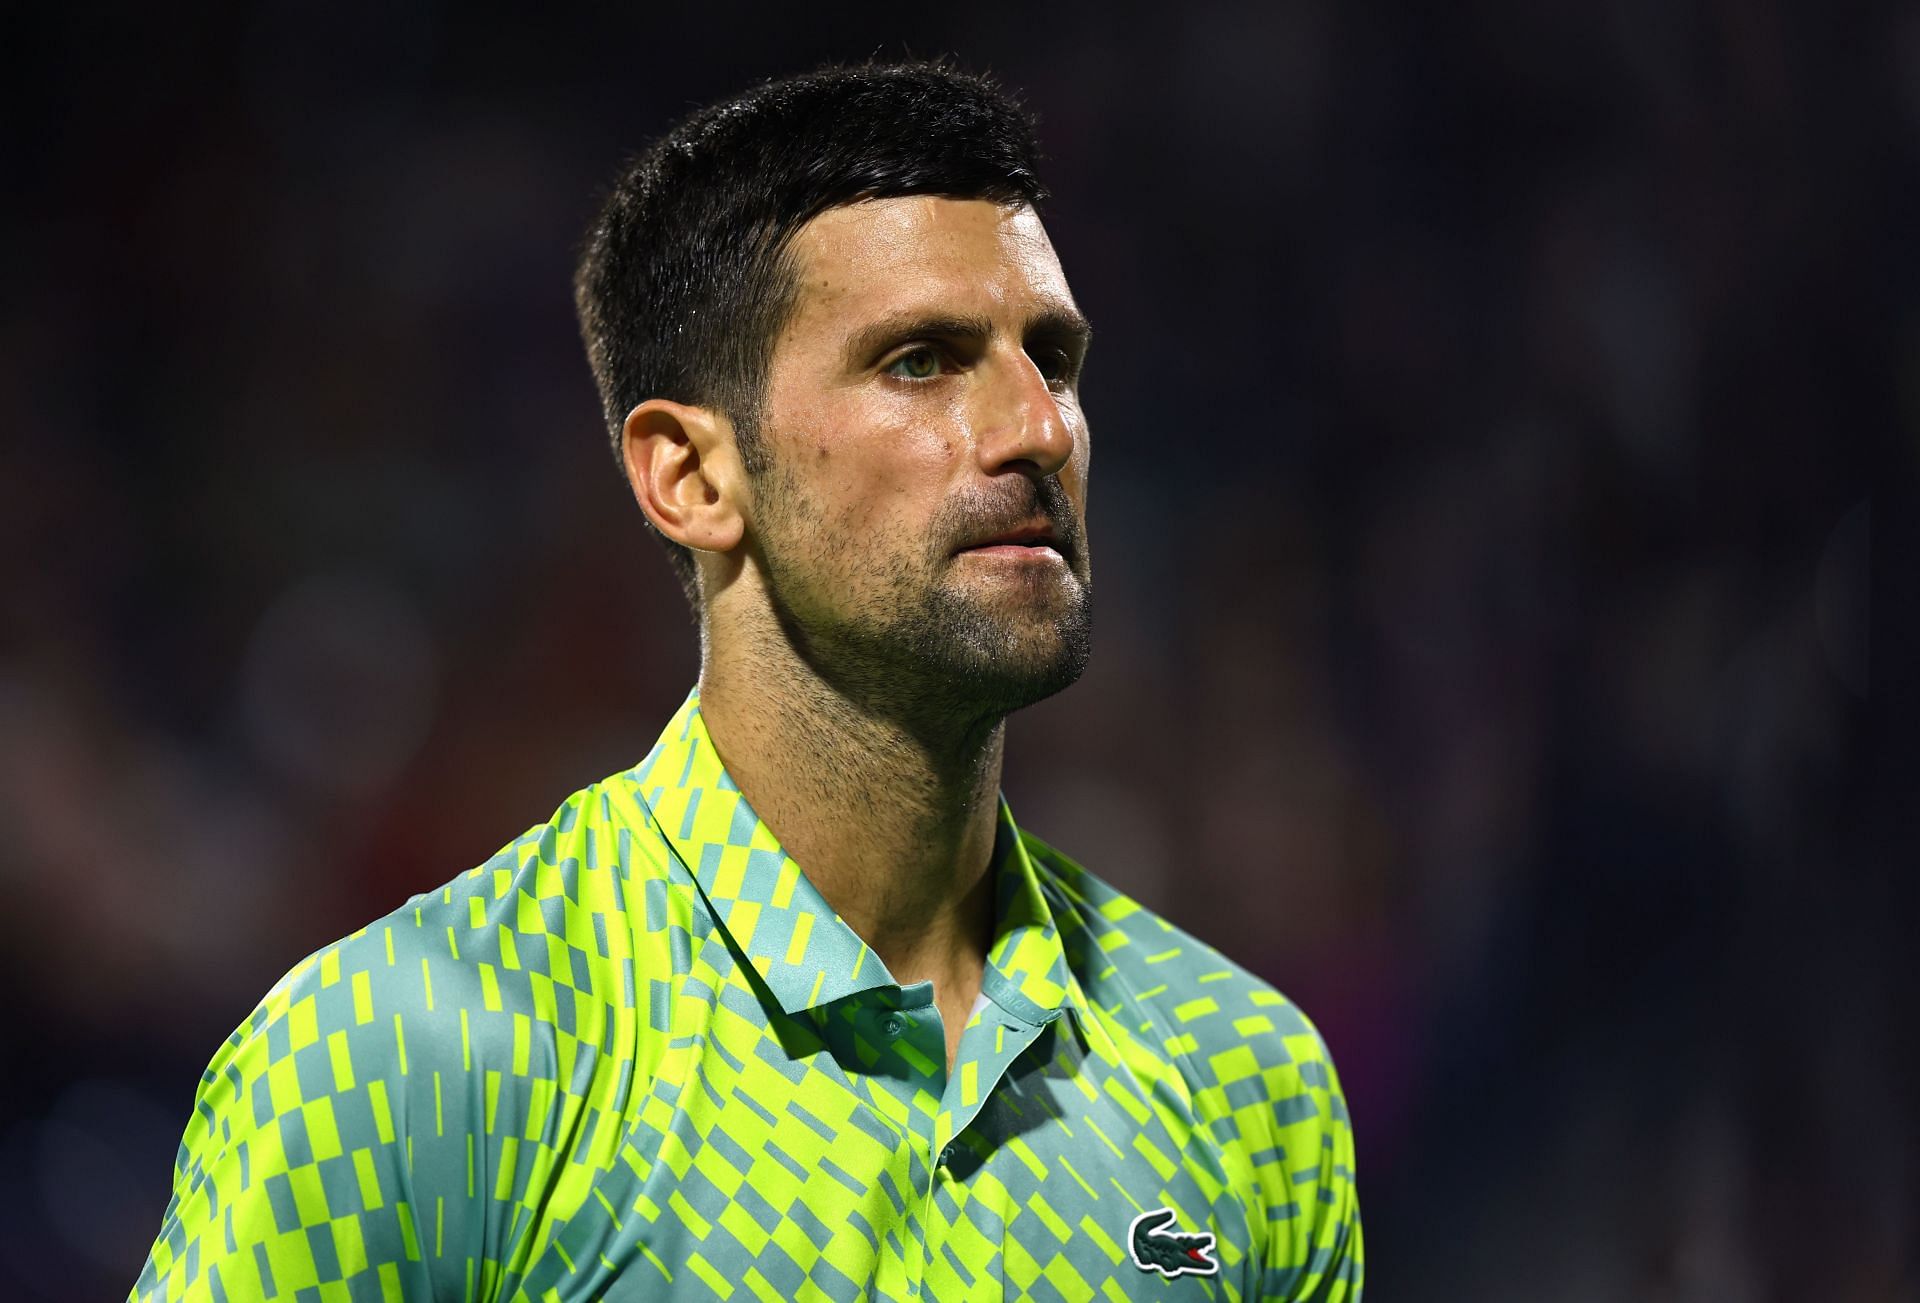 Novak Djokovic&#039;s last appearance at the Miami Open was in 2019.